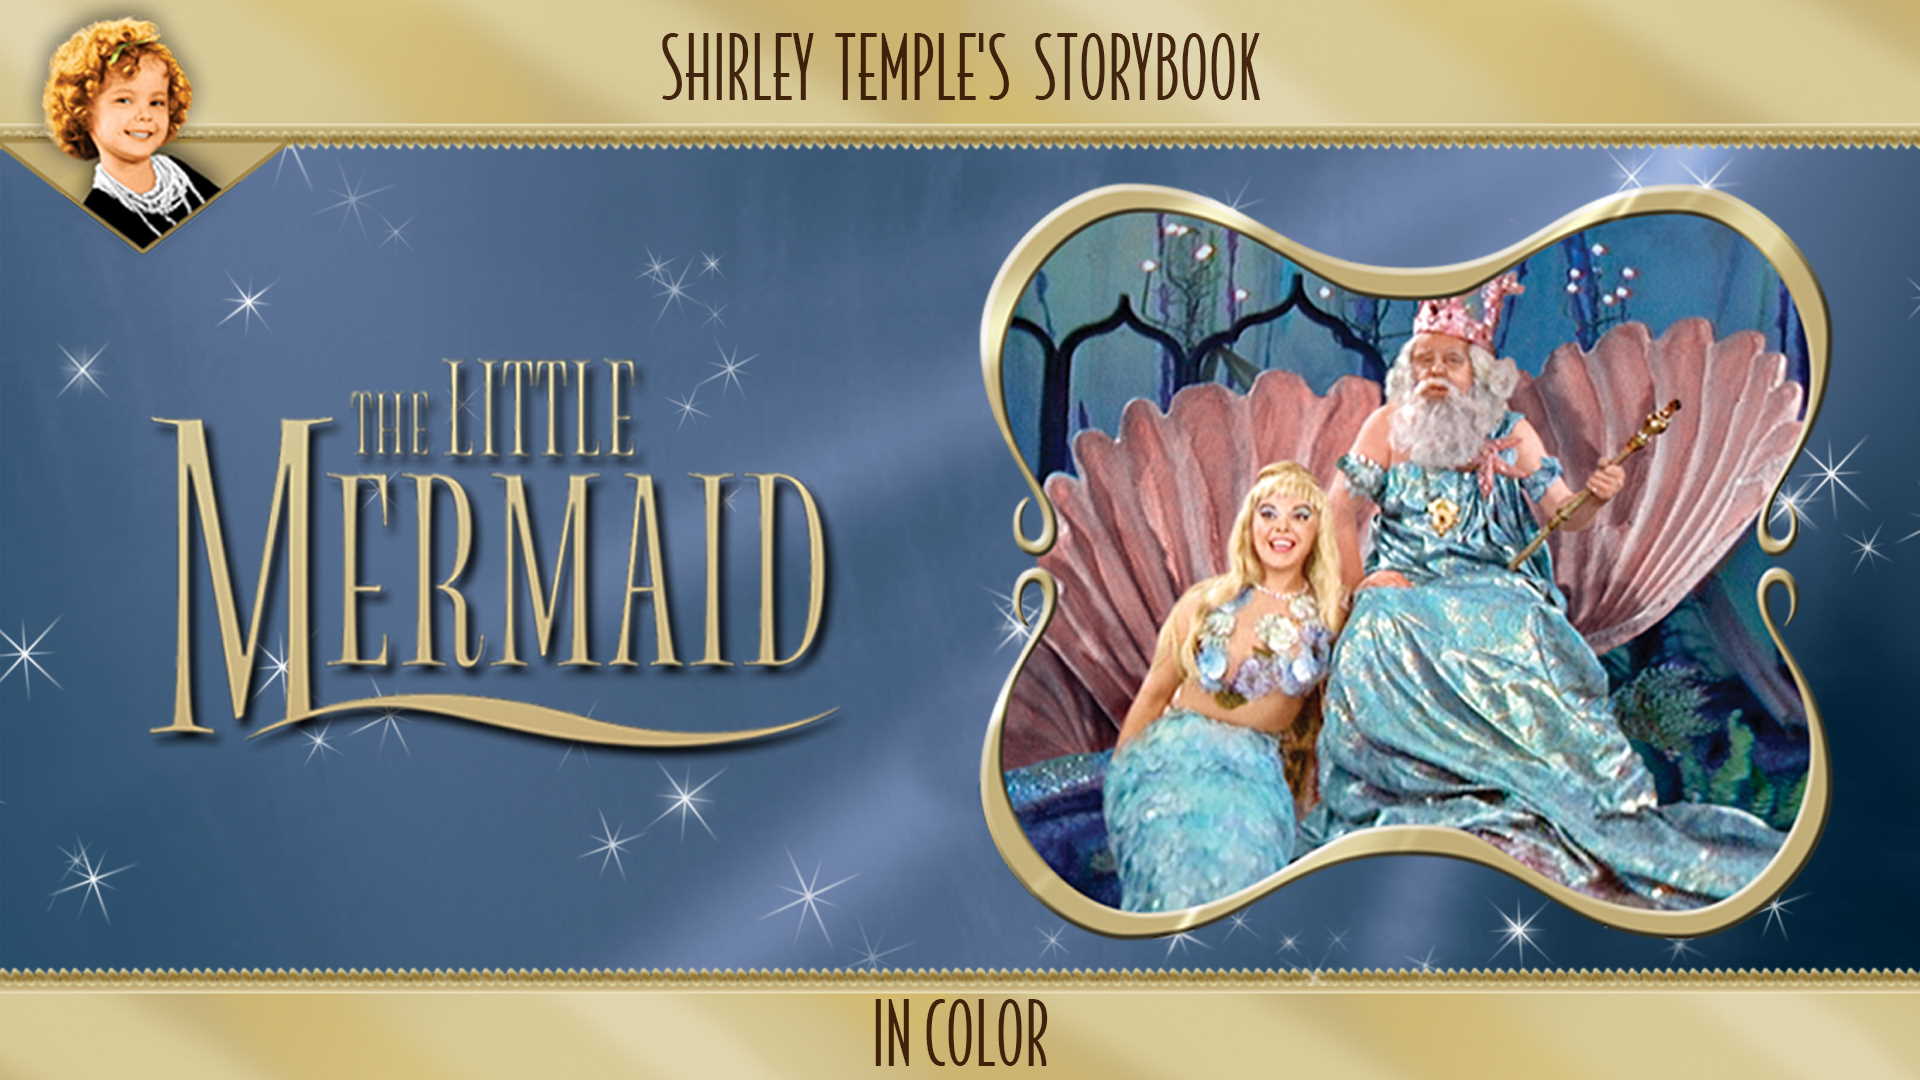 Shirley Temple's Storybook: The Little Mermaid (In Color)